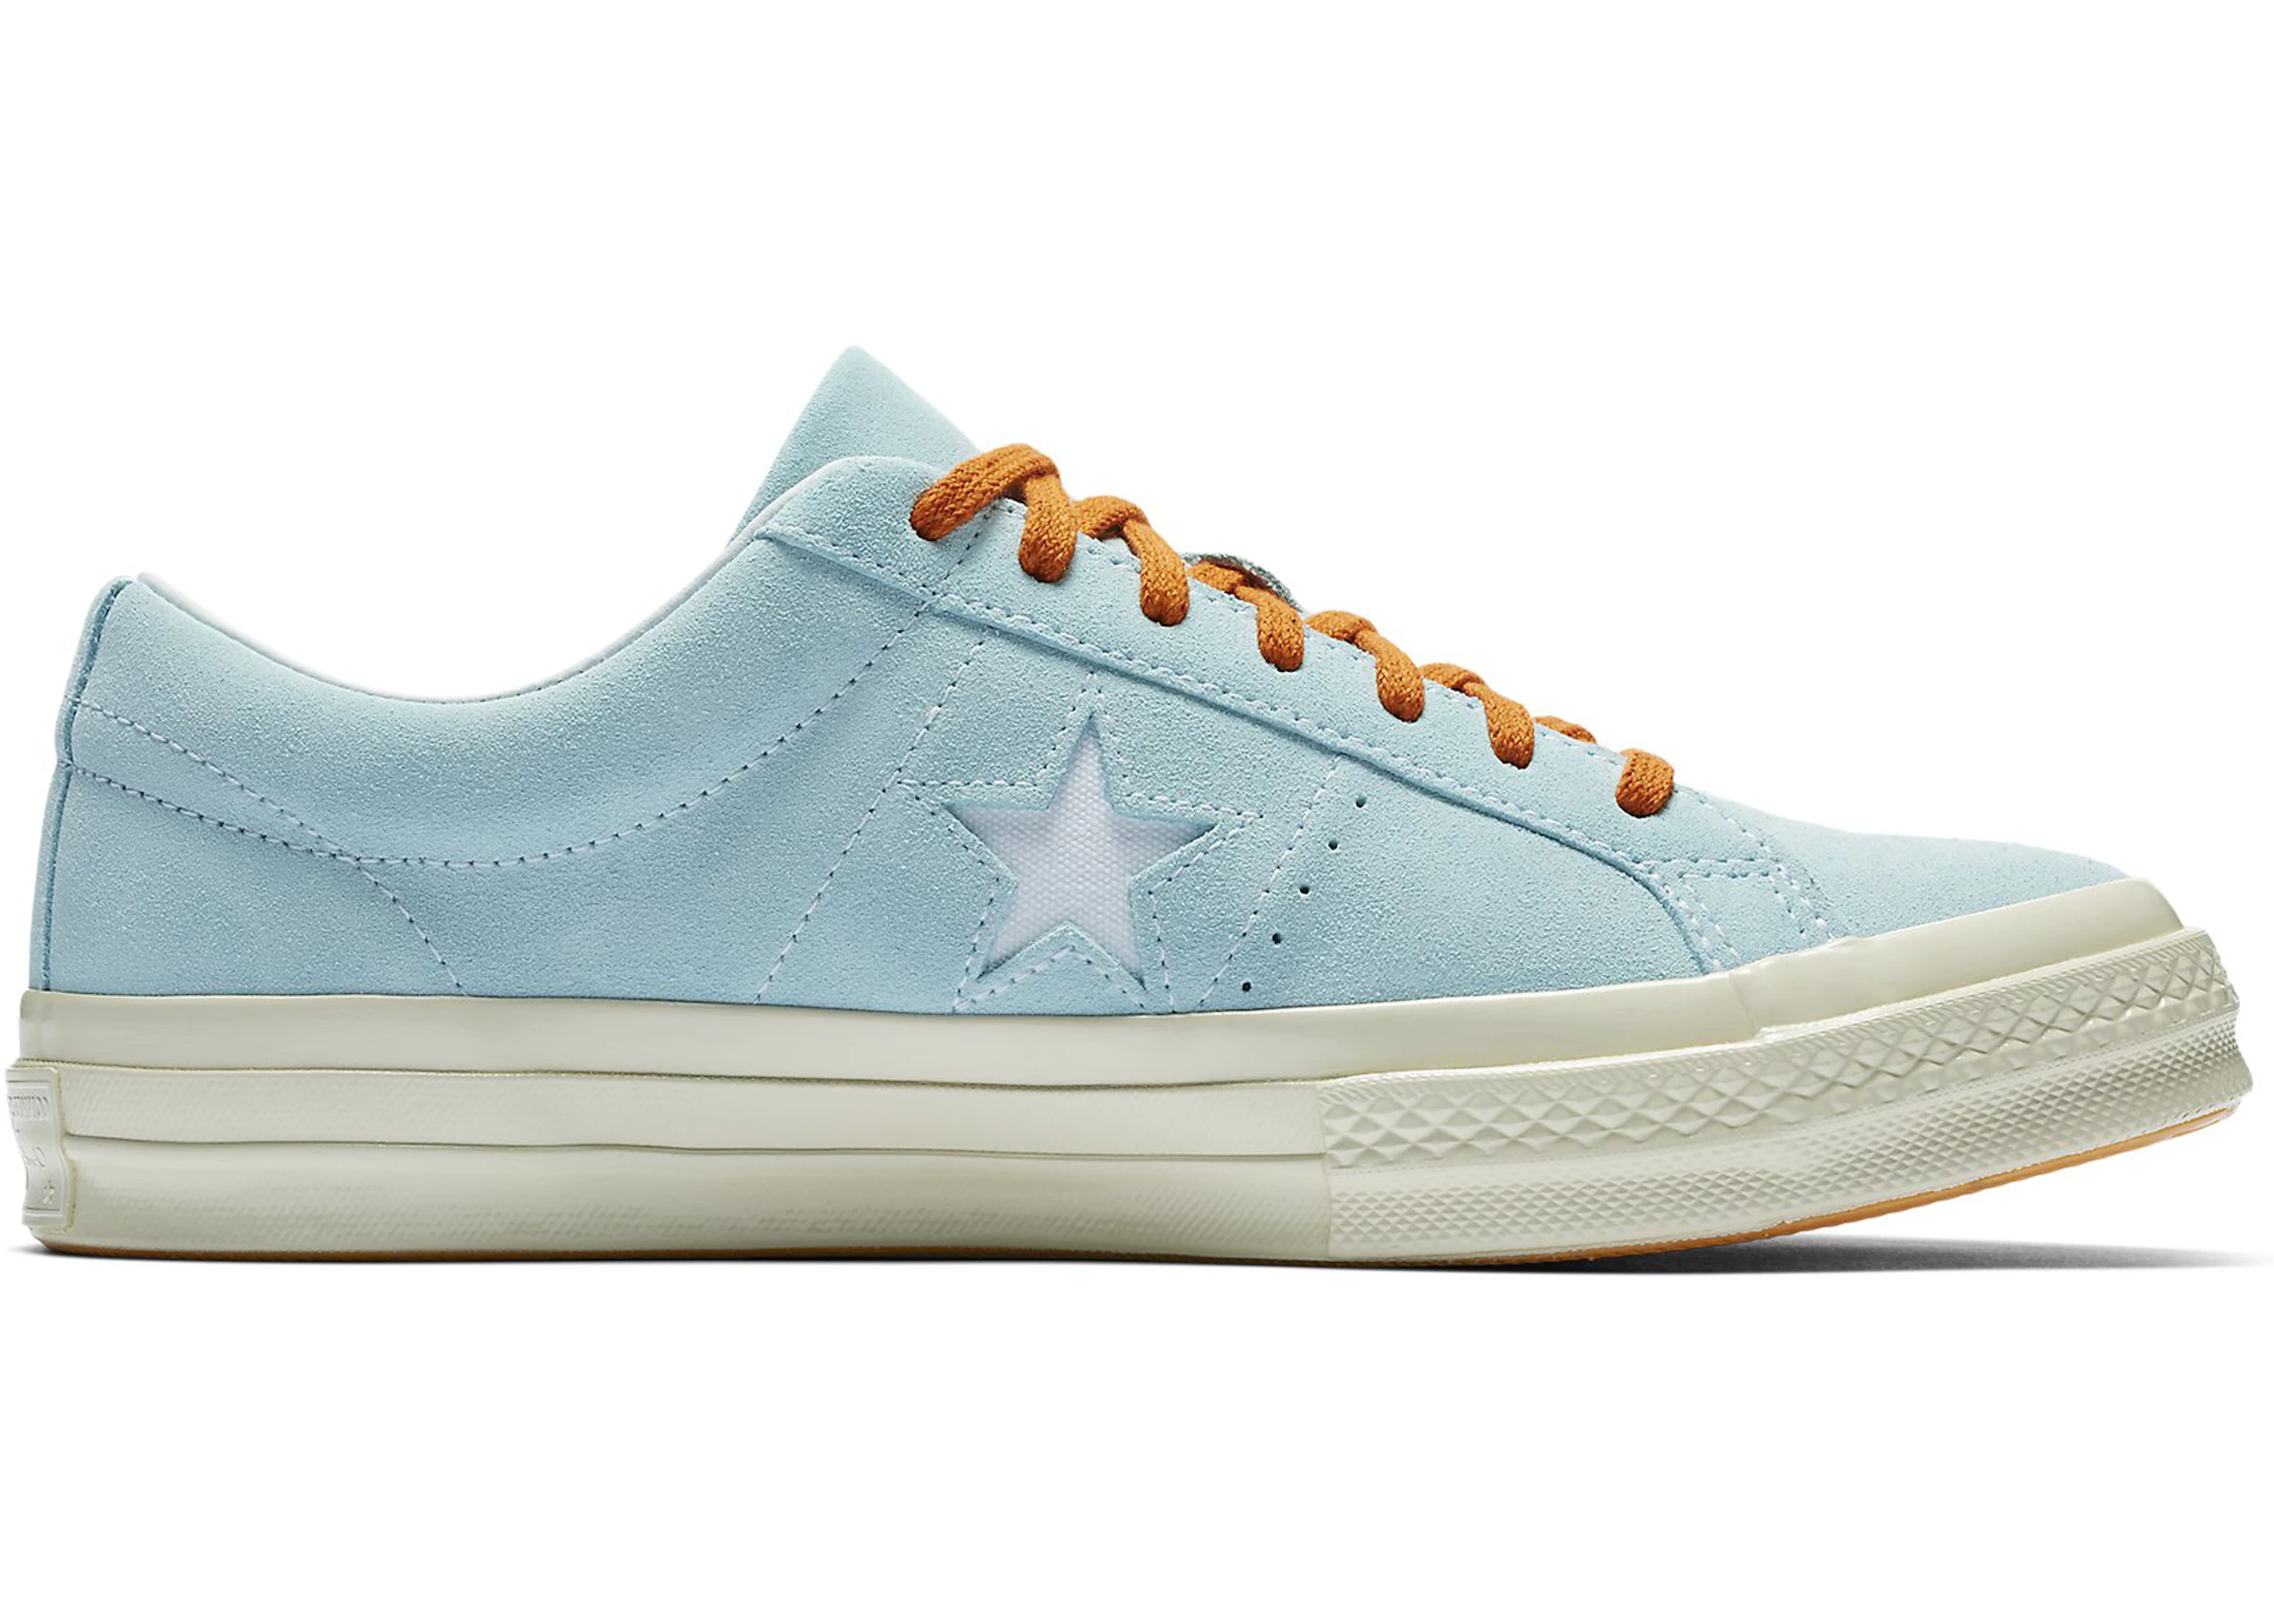 Converse One Star Ox Tyler the Creator Golf Wang Clearwater - 160111C - US